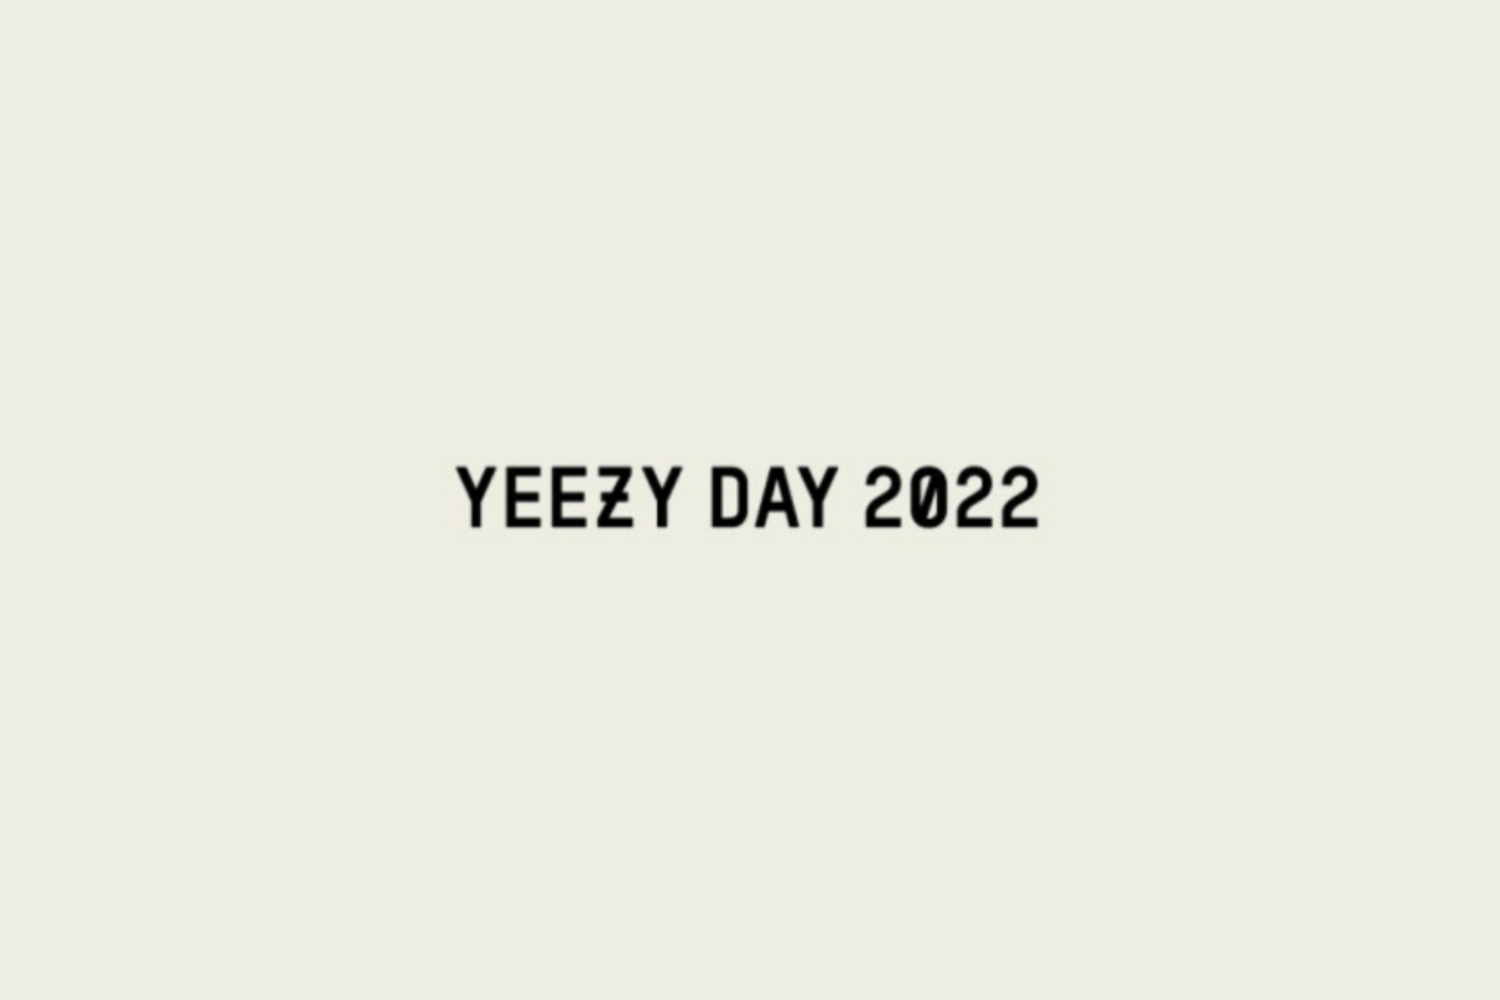 Everything you need to know about Yeezy Day 2022